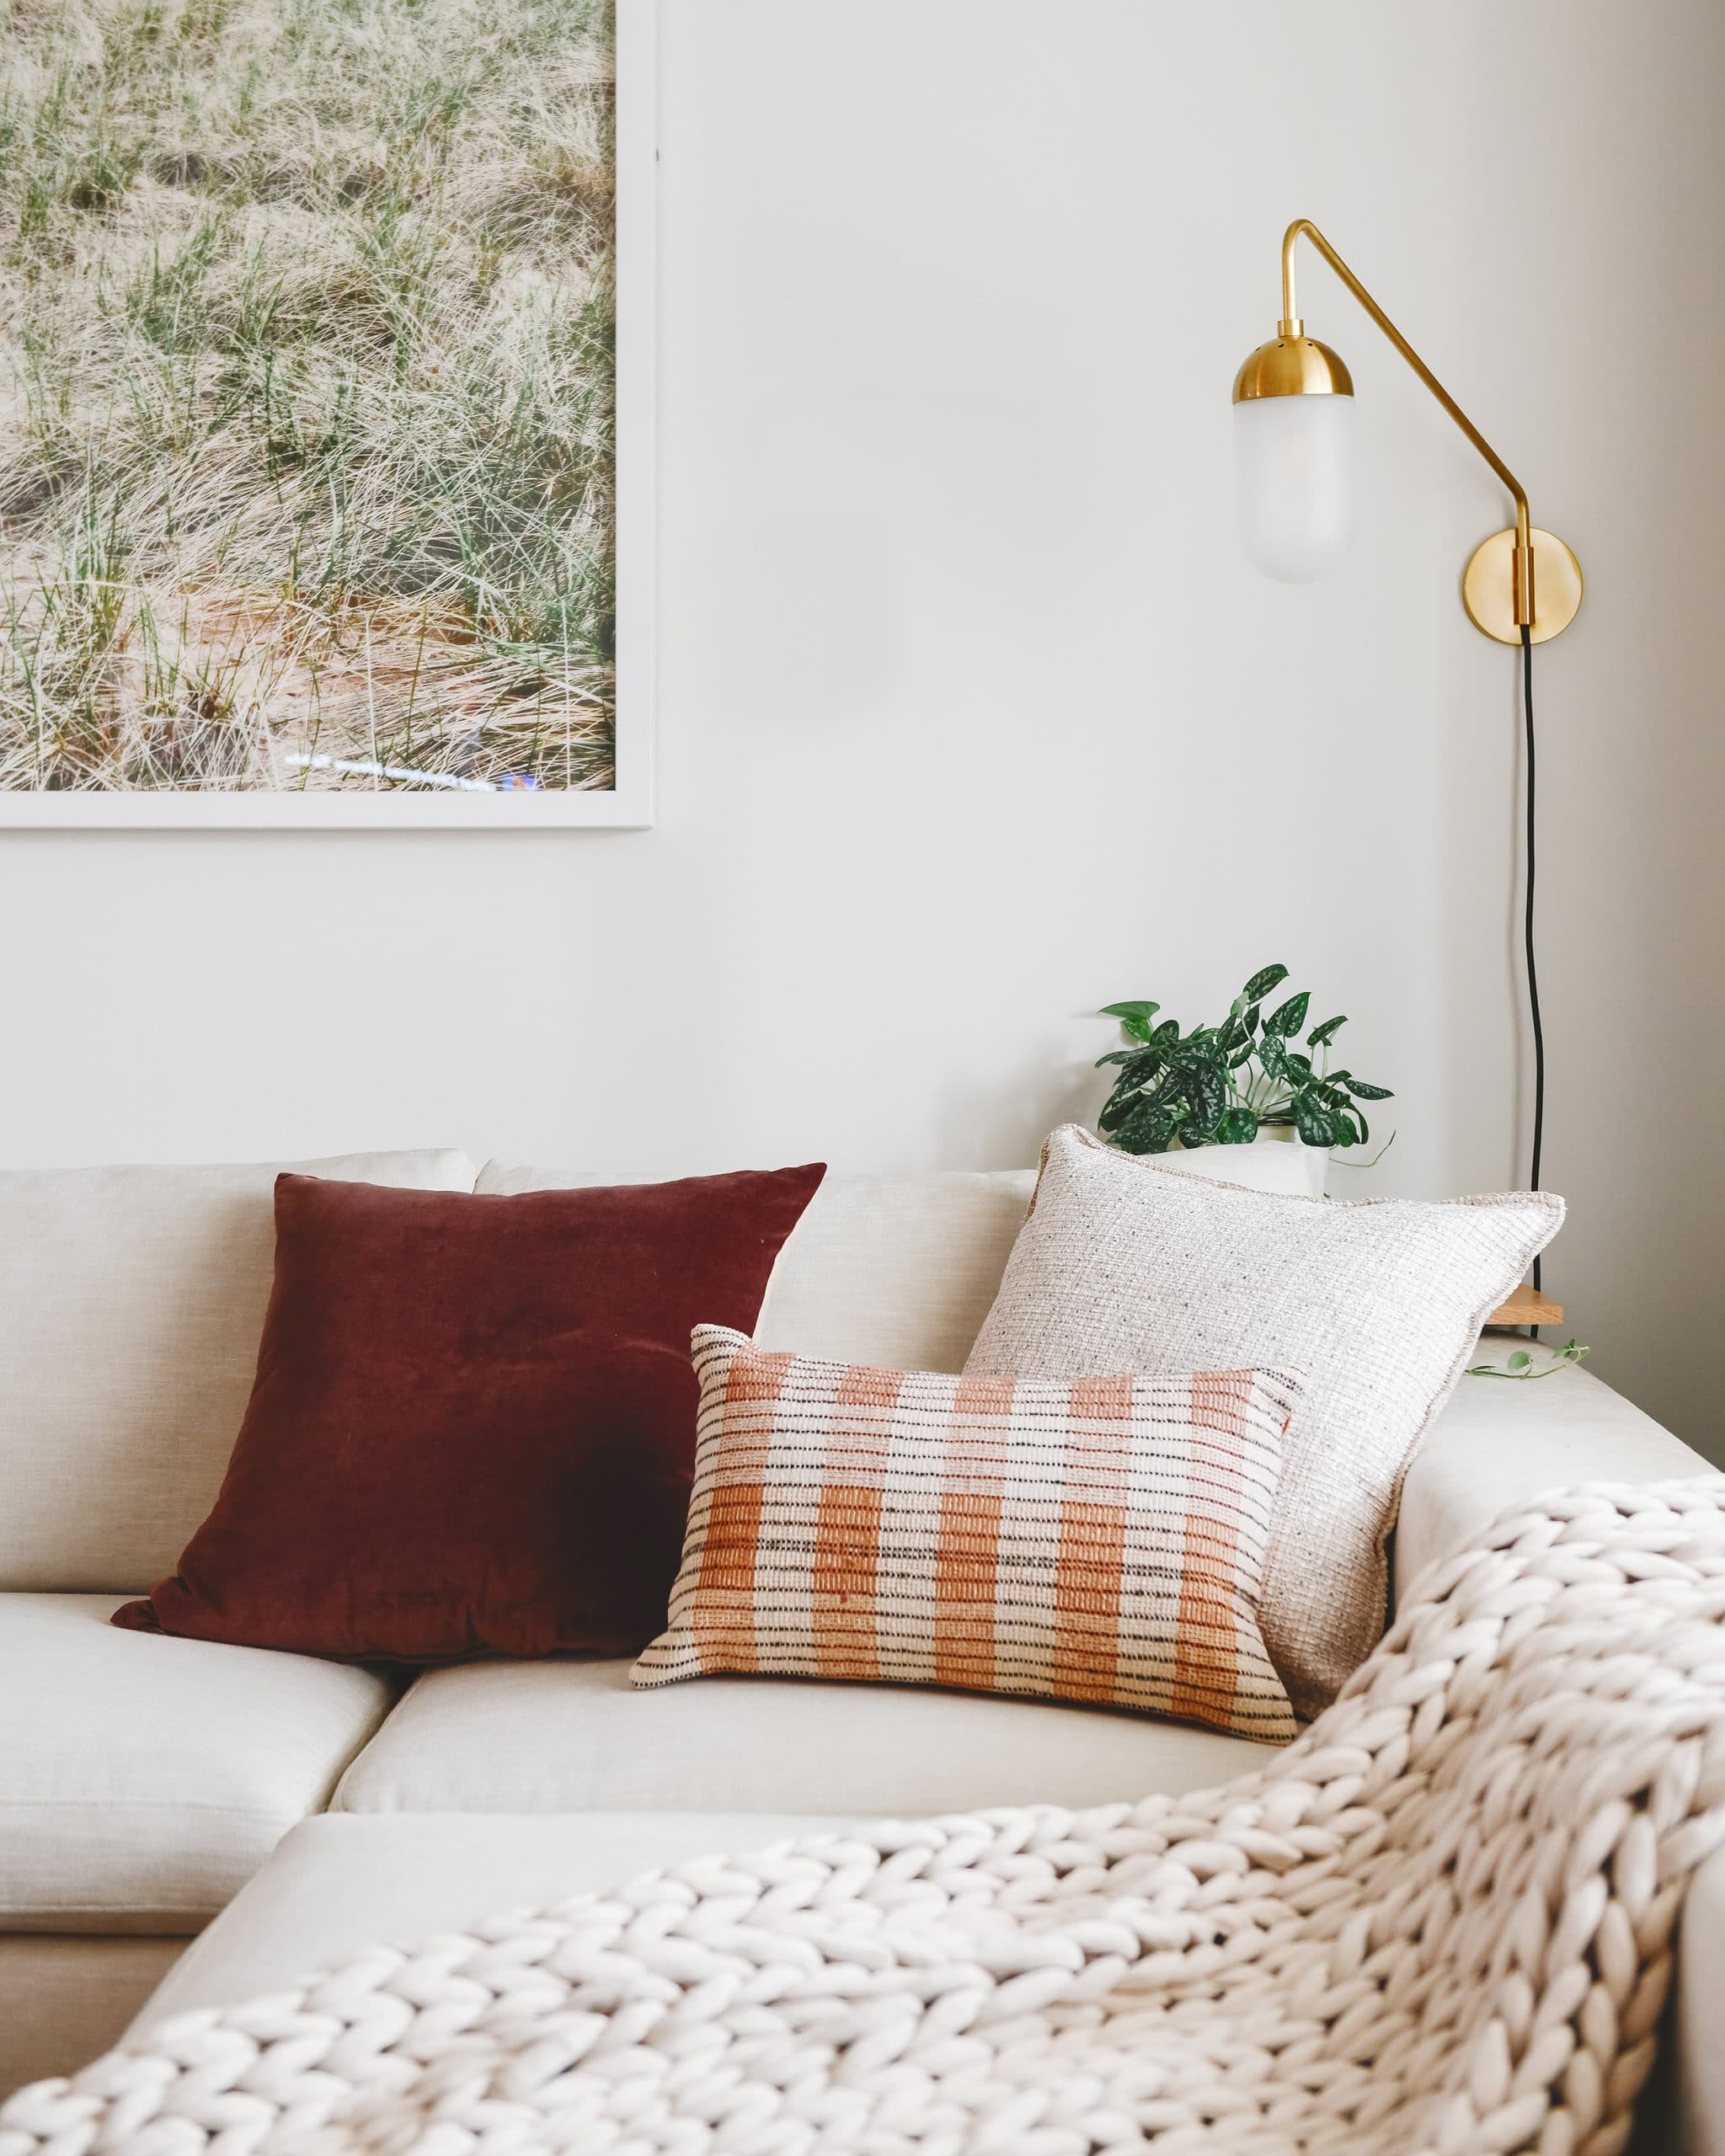 Close up of corner pillows on sectional | I'm sharing my simple, inviting formula for styling pillows on an L-shaped or U-shaped sofa, via Yellow Brick Home